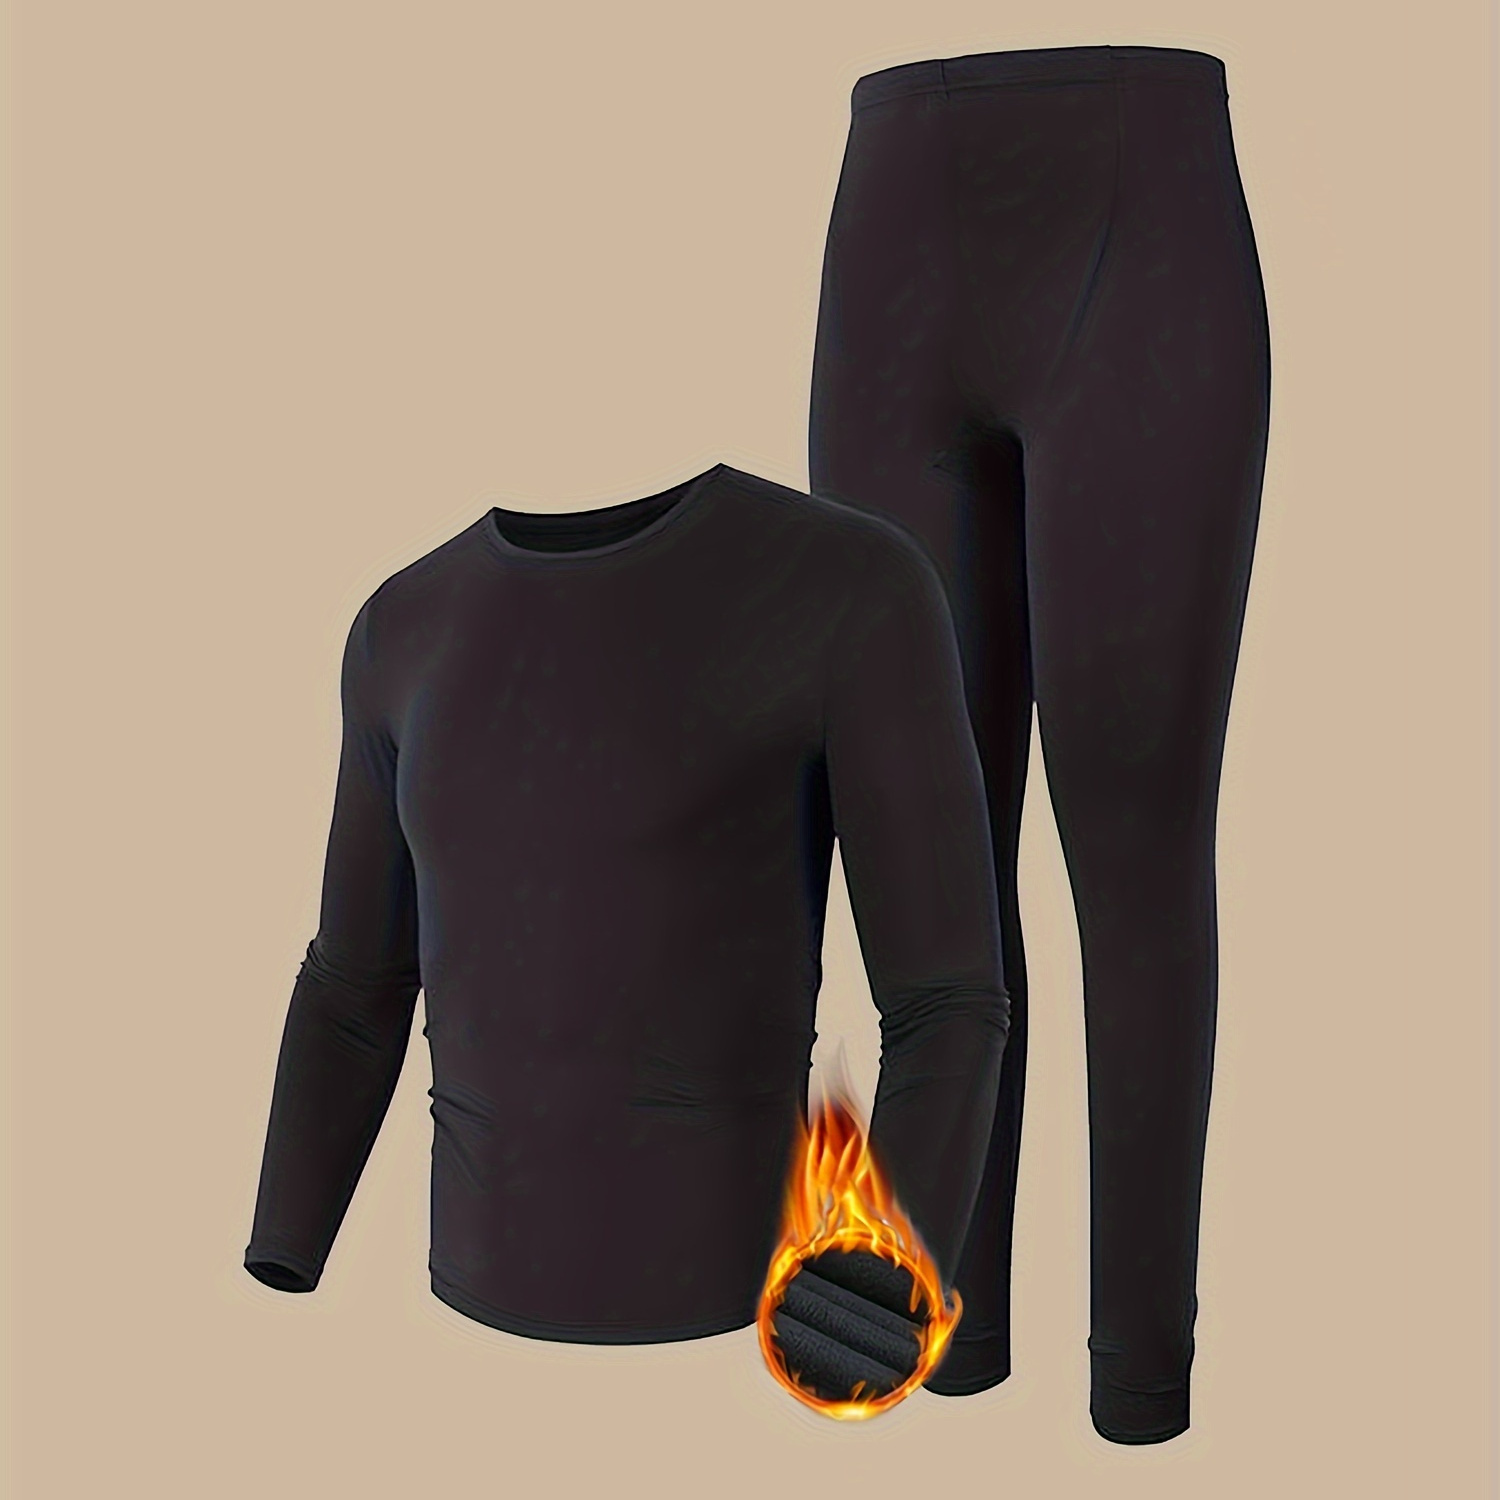 

Thermal Underwear For Men, Ultra Soft Long Johns Fleece Lined Base Layer Cold Weather Top And Bottom Set